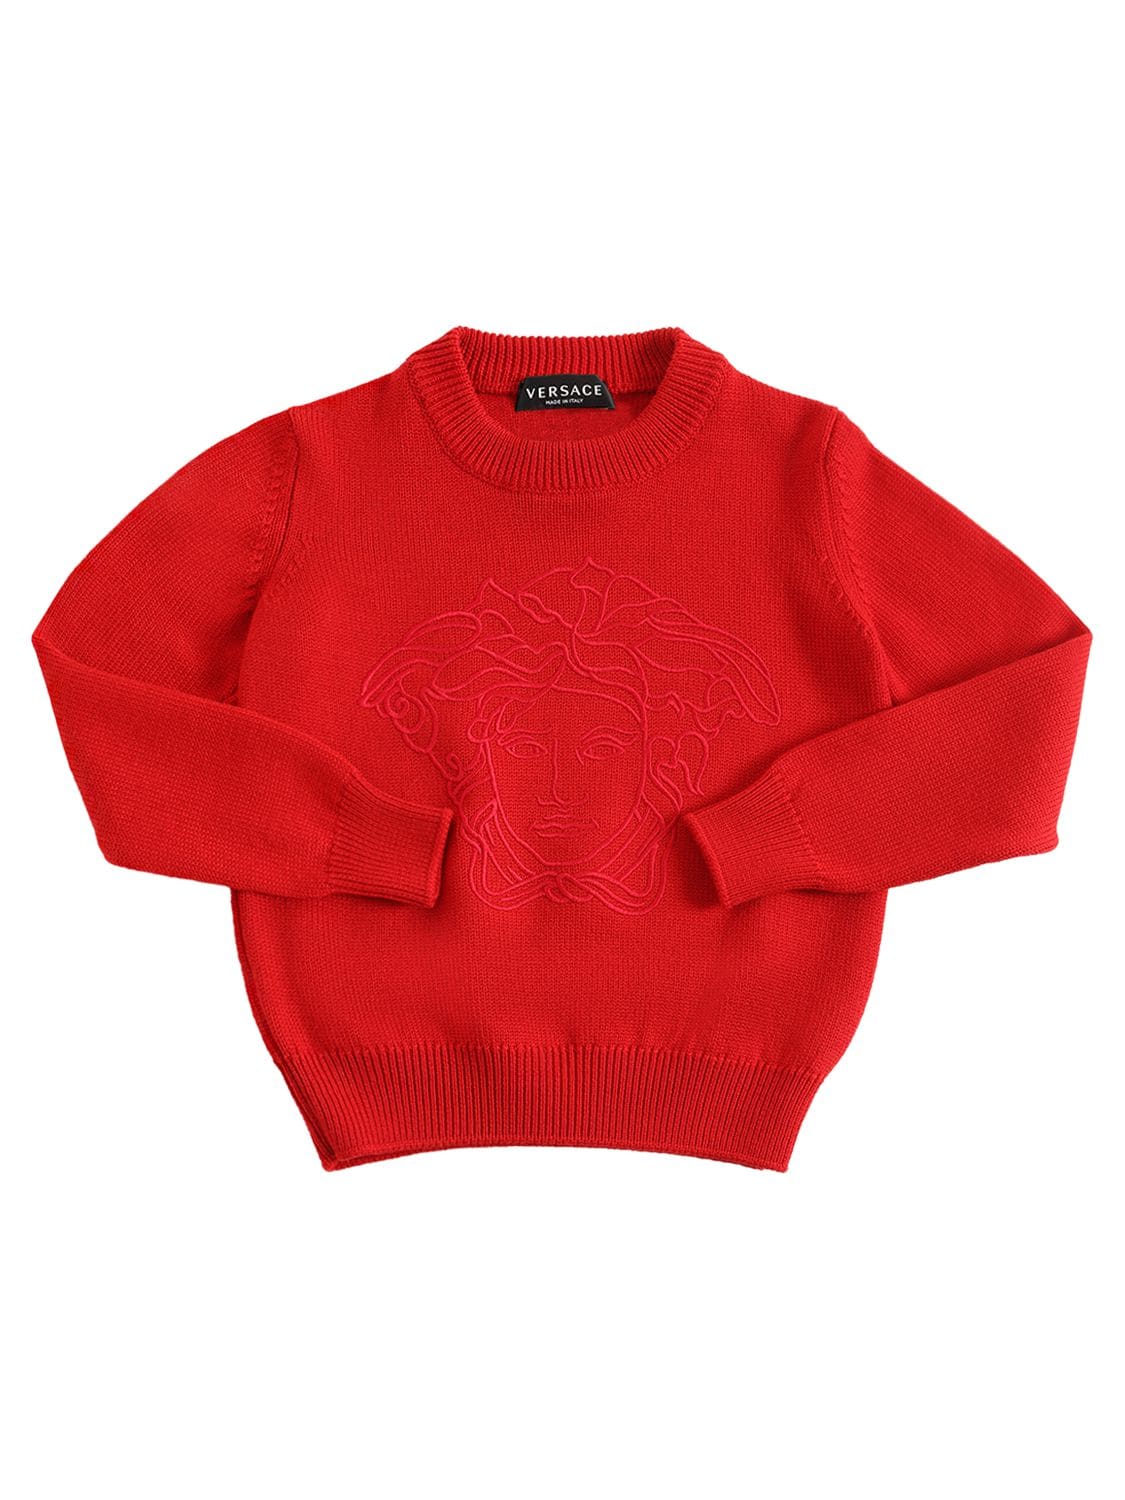 Versace Kids' Medusa Embroidery Wool Sweater In Red